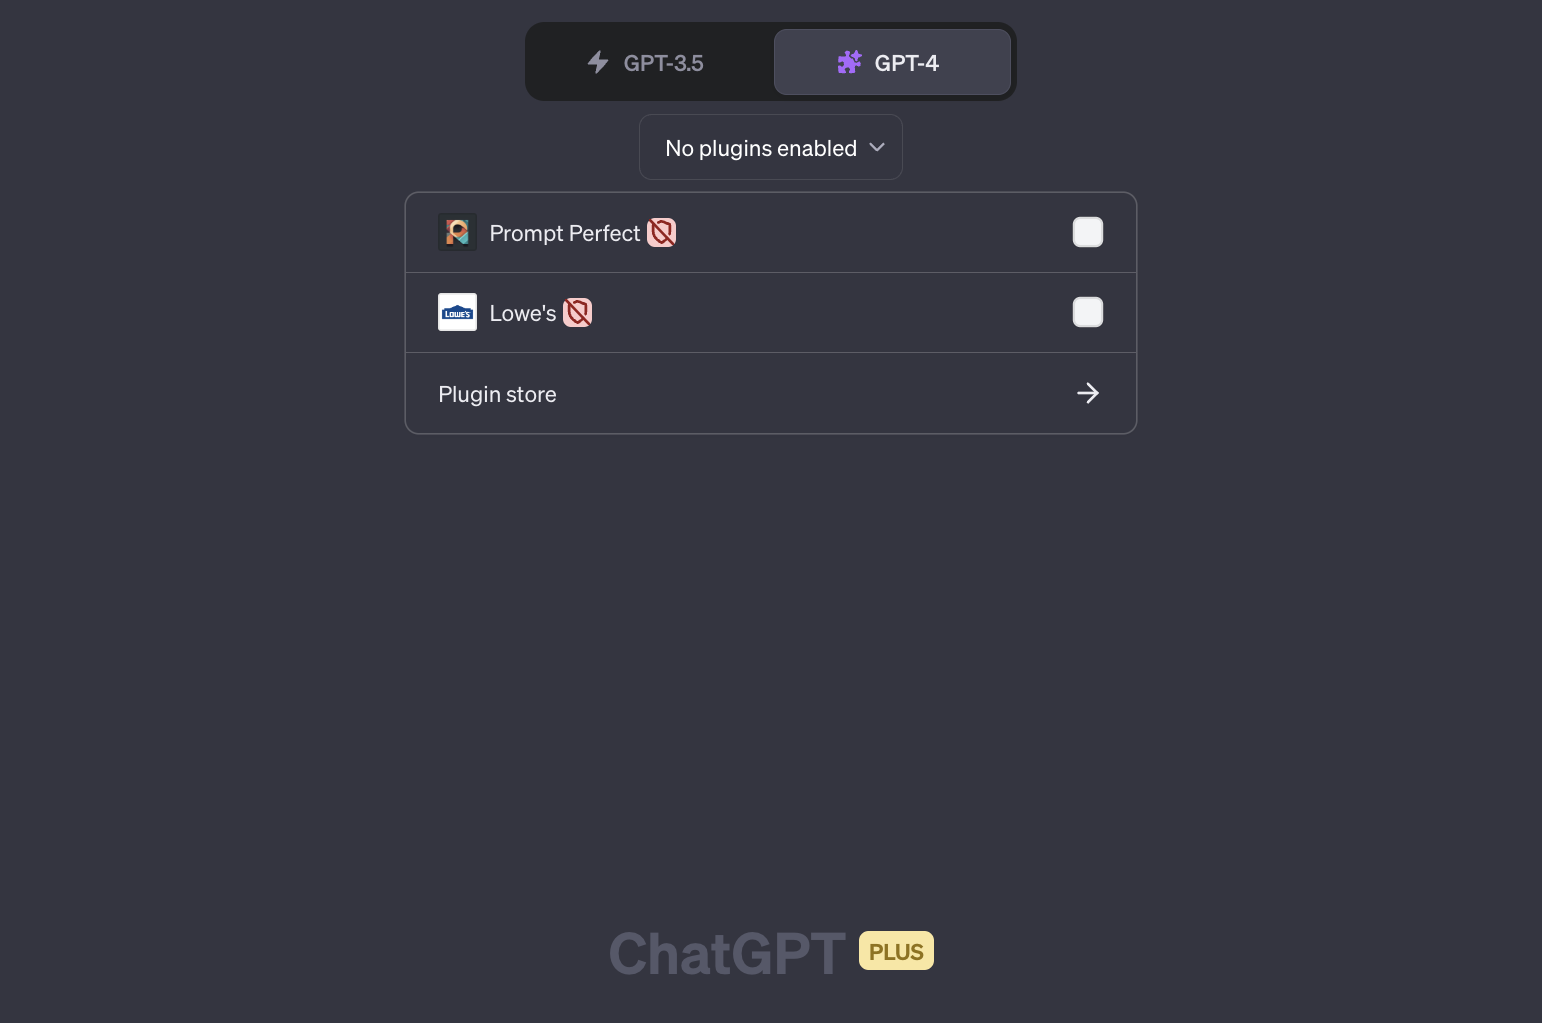 How To Use ChatGPT Plugins For Work